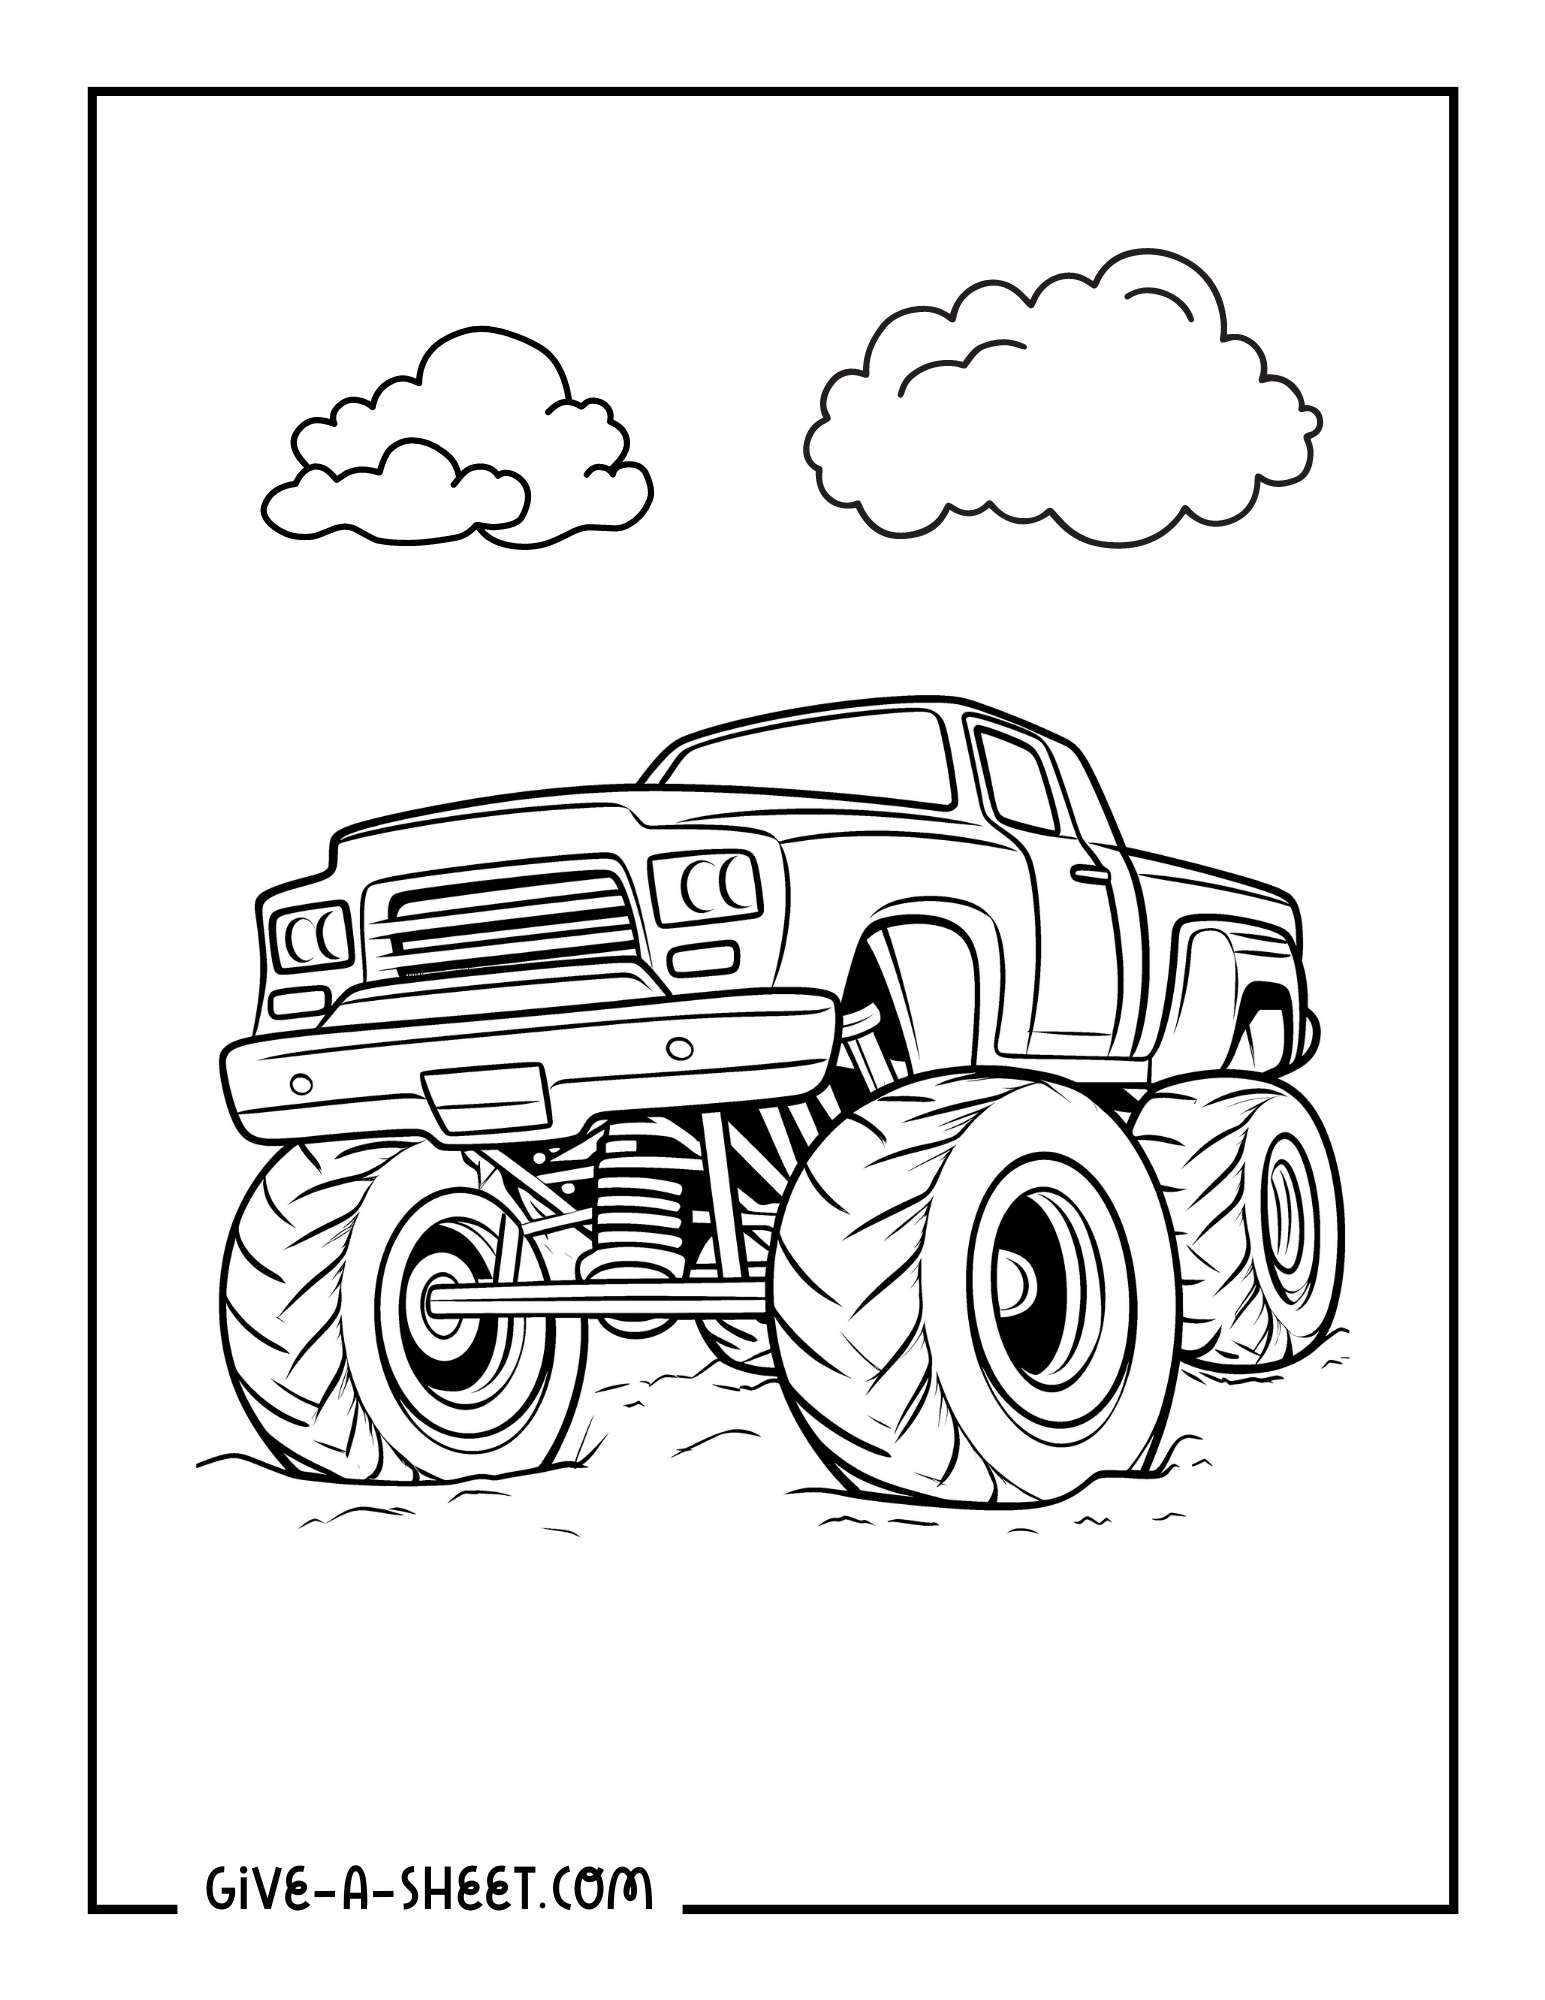 Monster truck with big wheels coloring page.